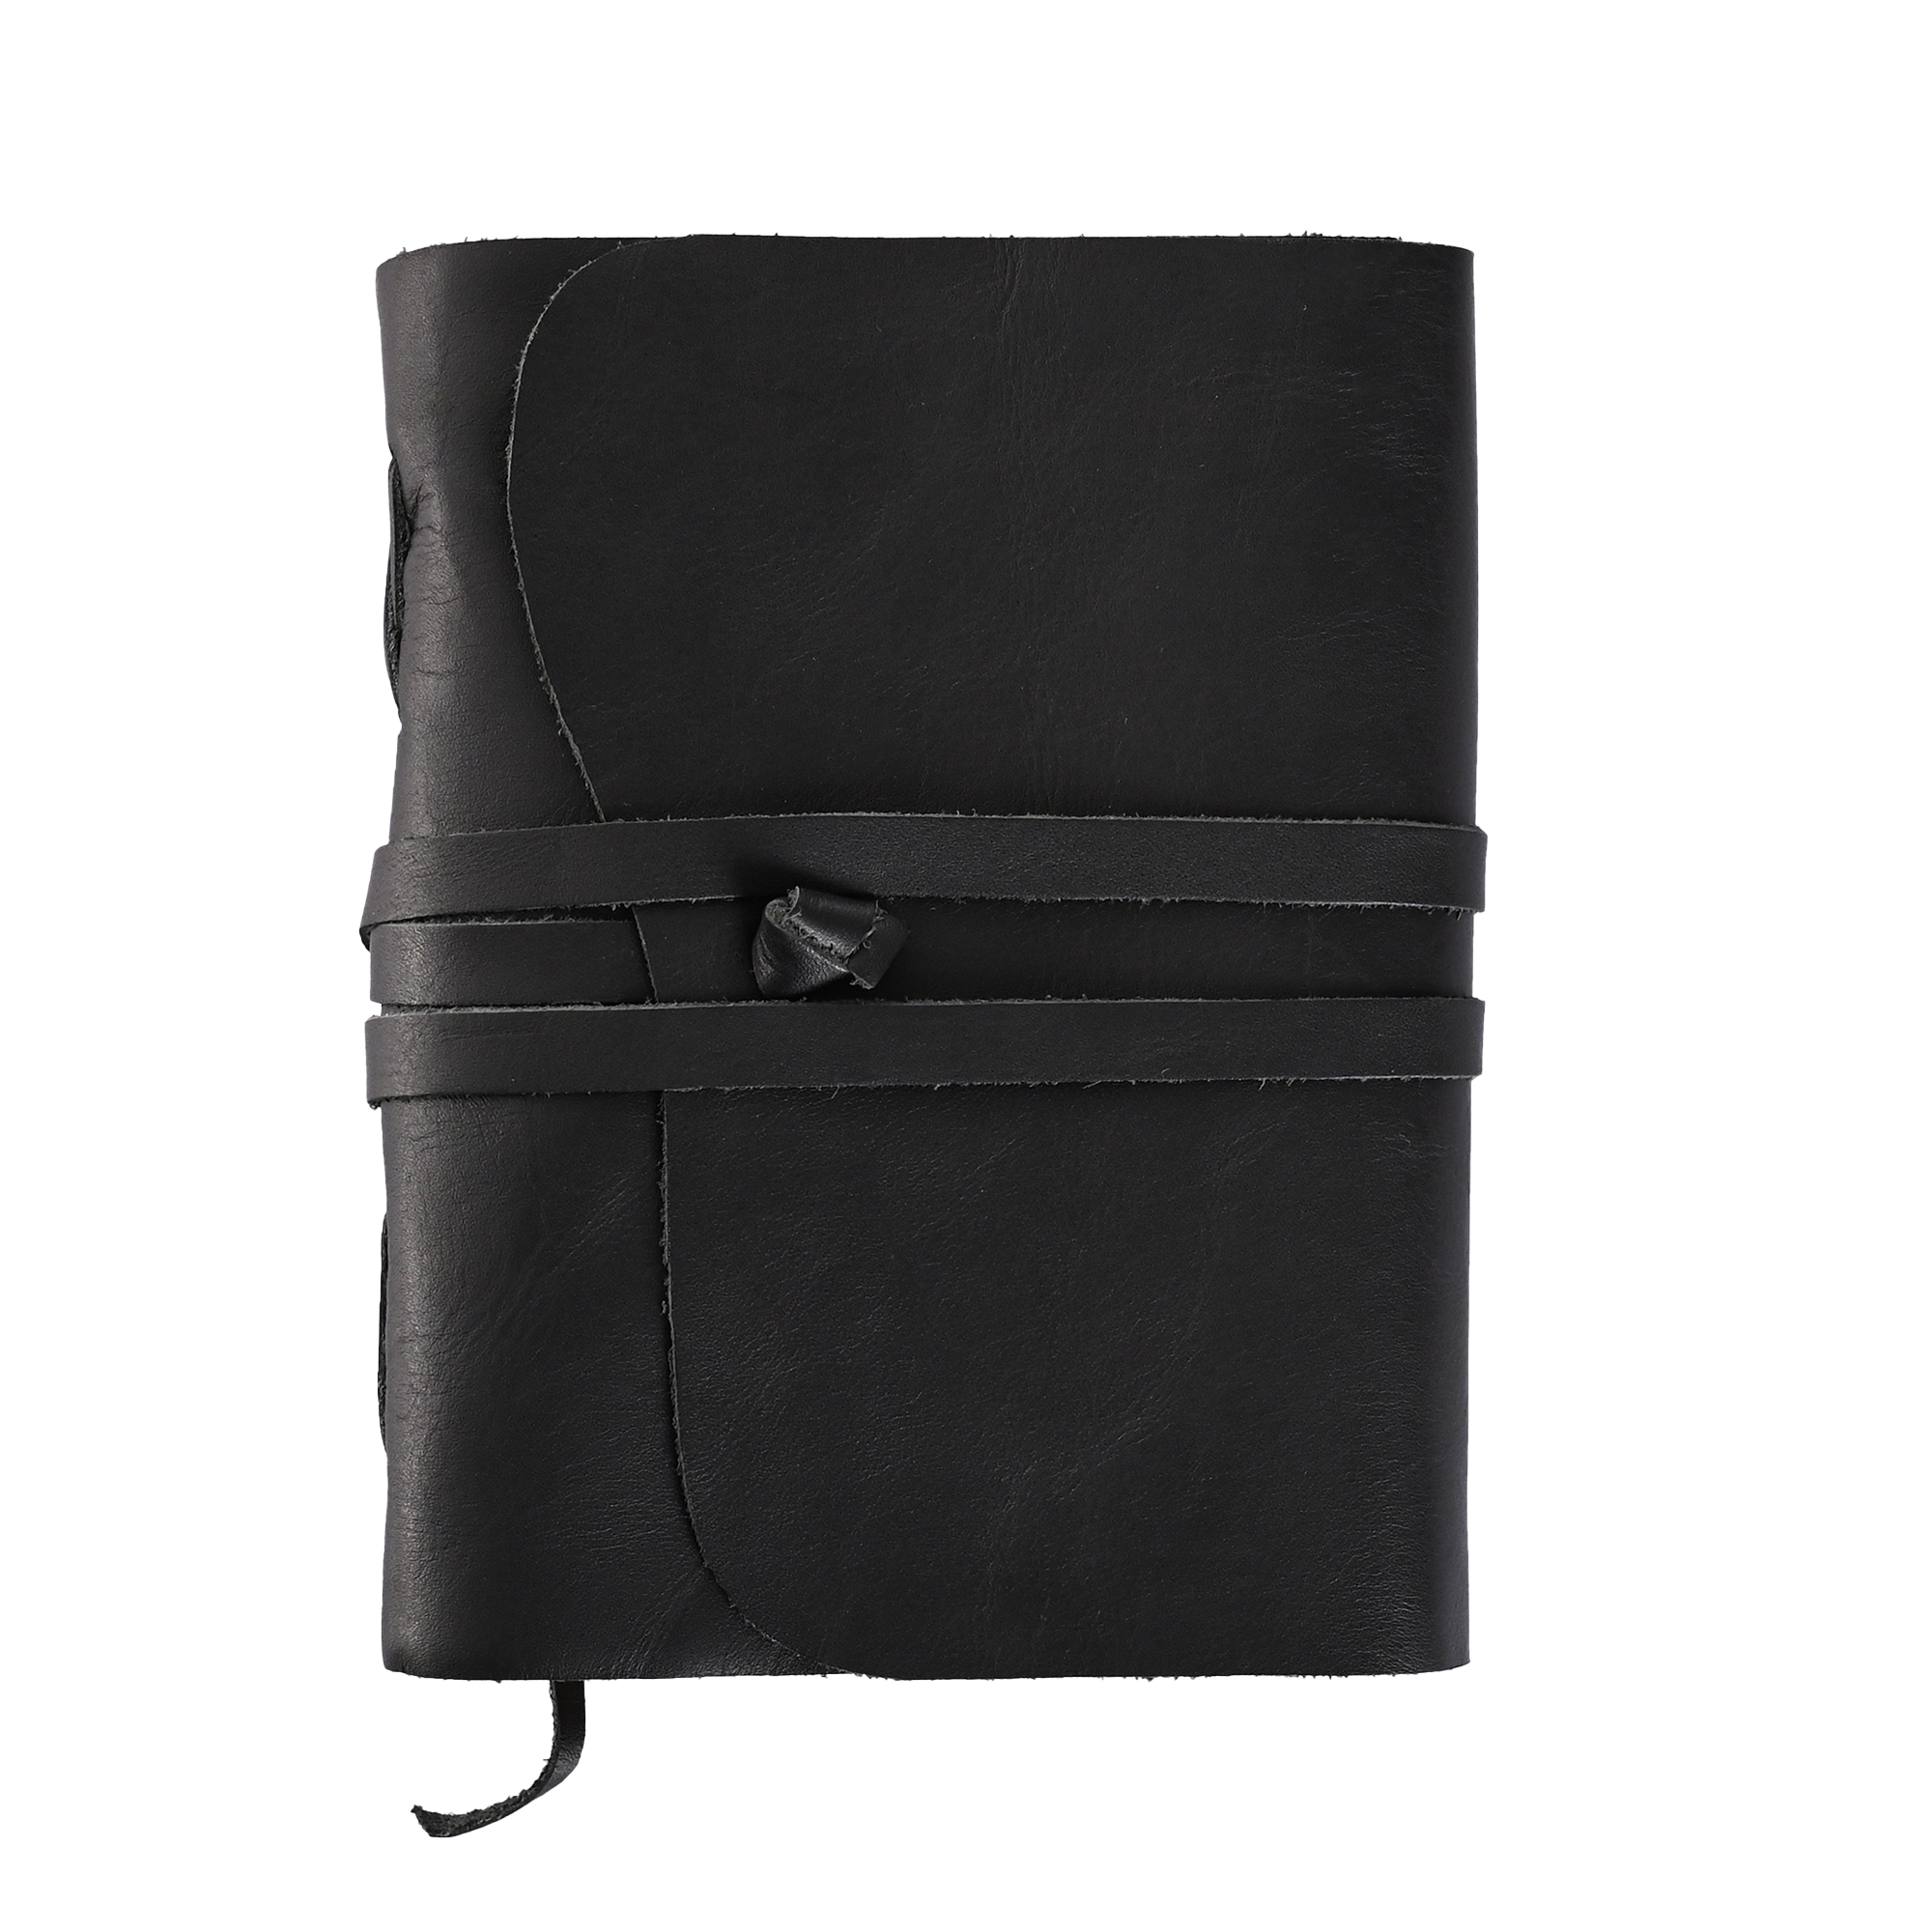 Refillable Writing Journal Lined Natural - Black Onyx (5x7)